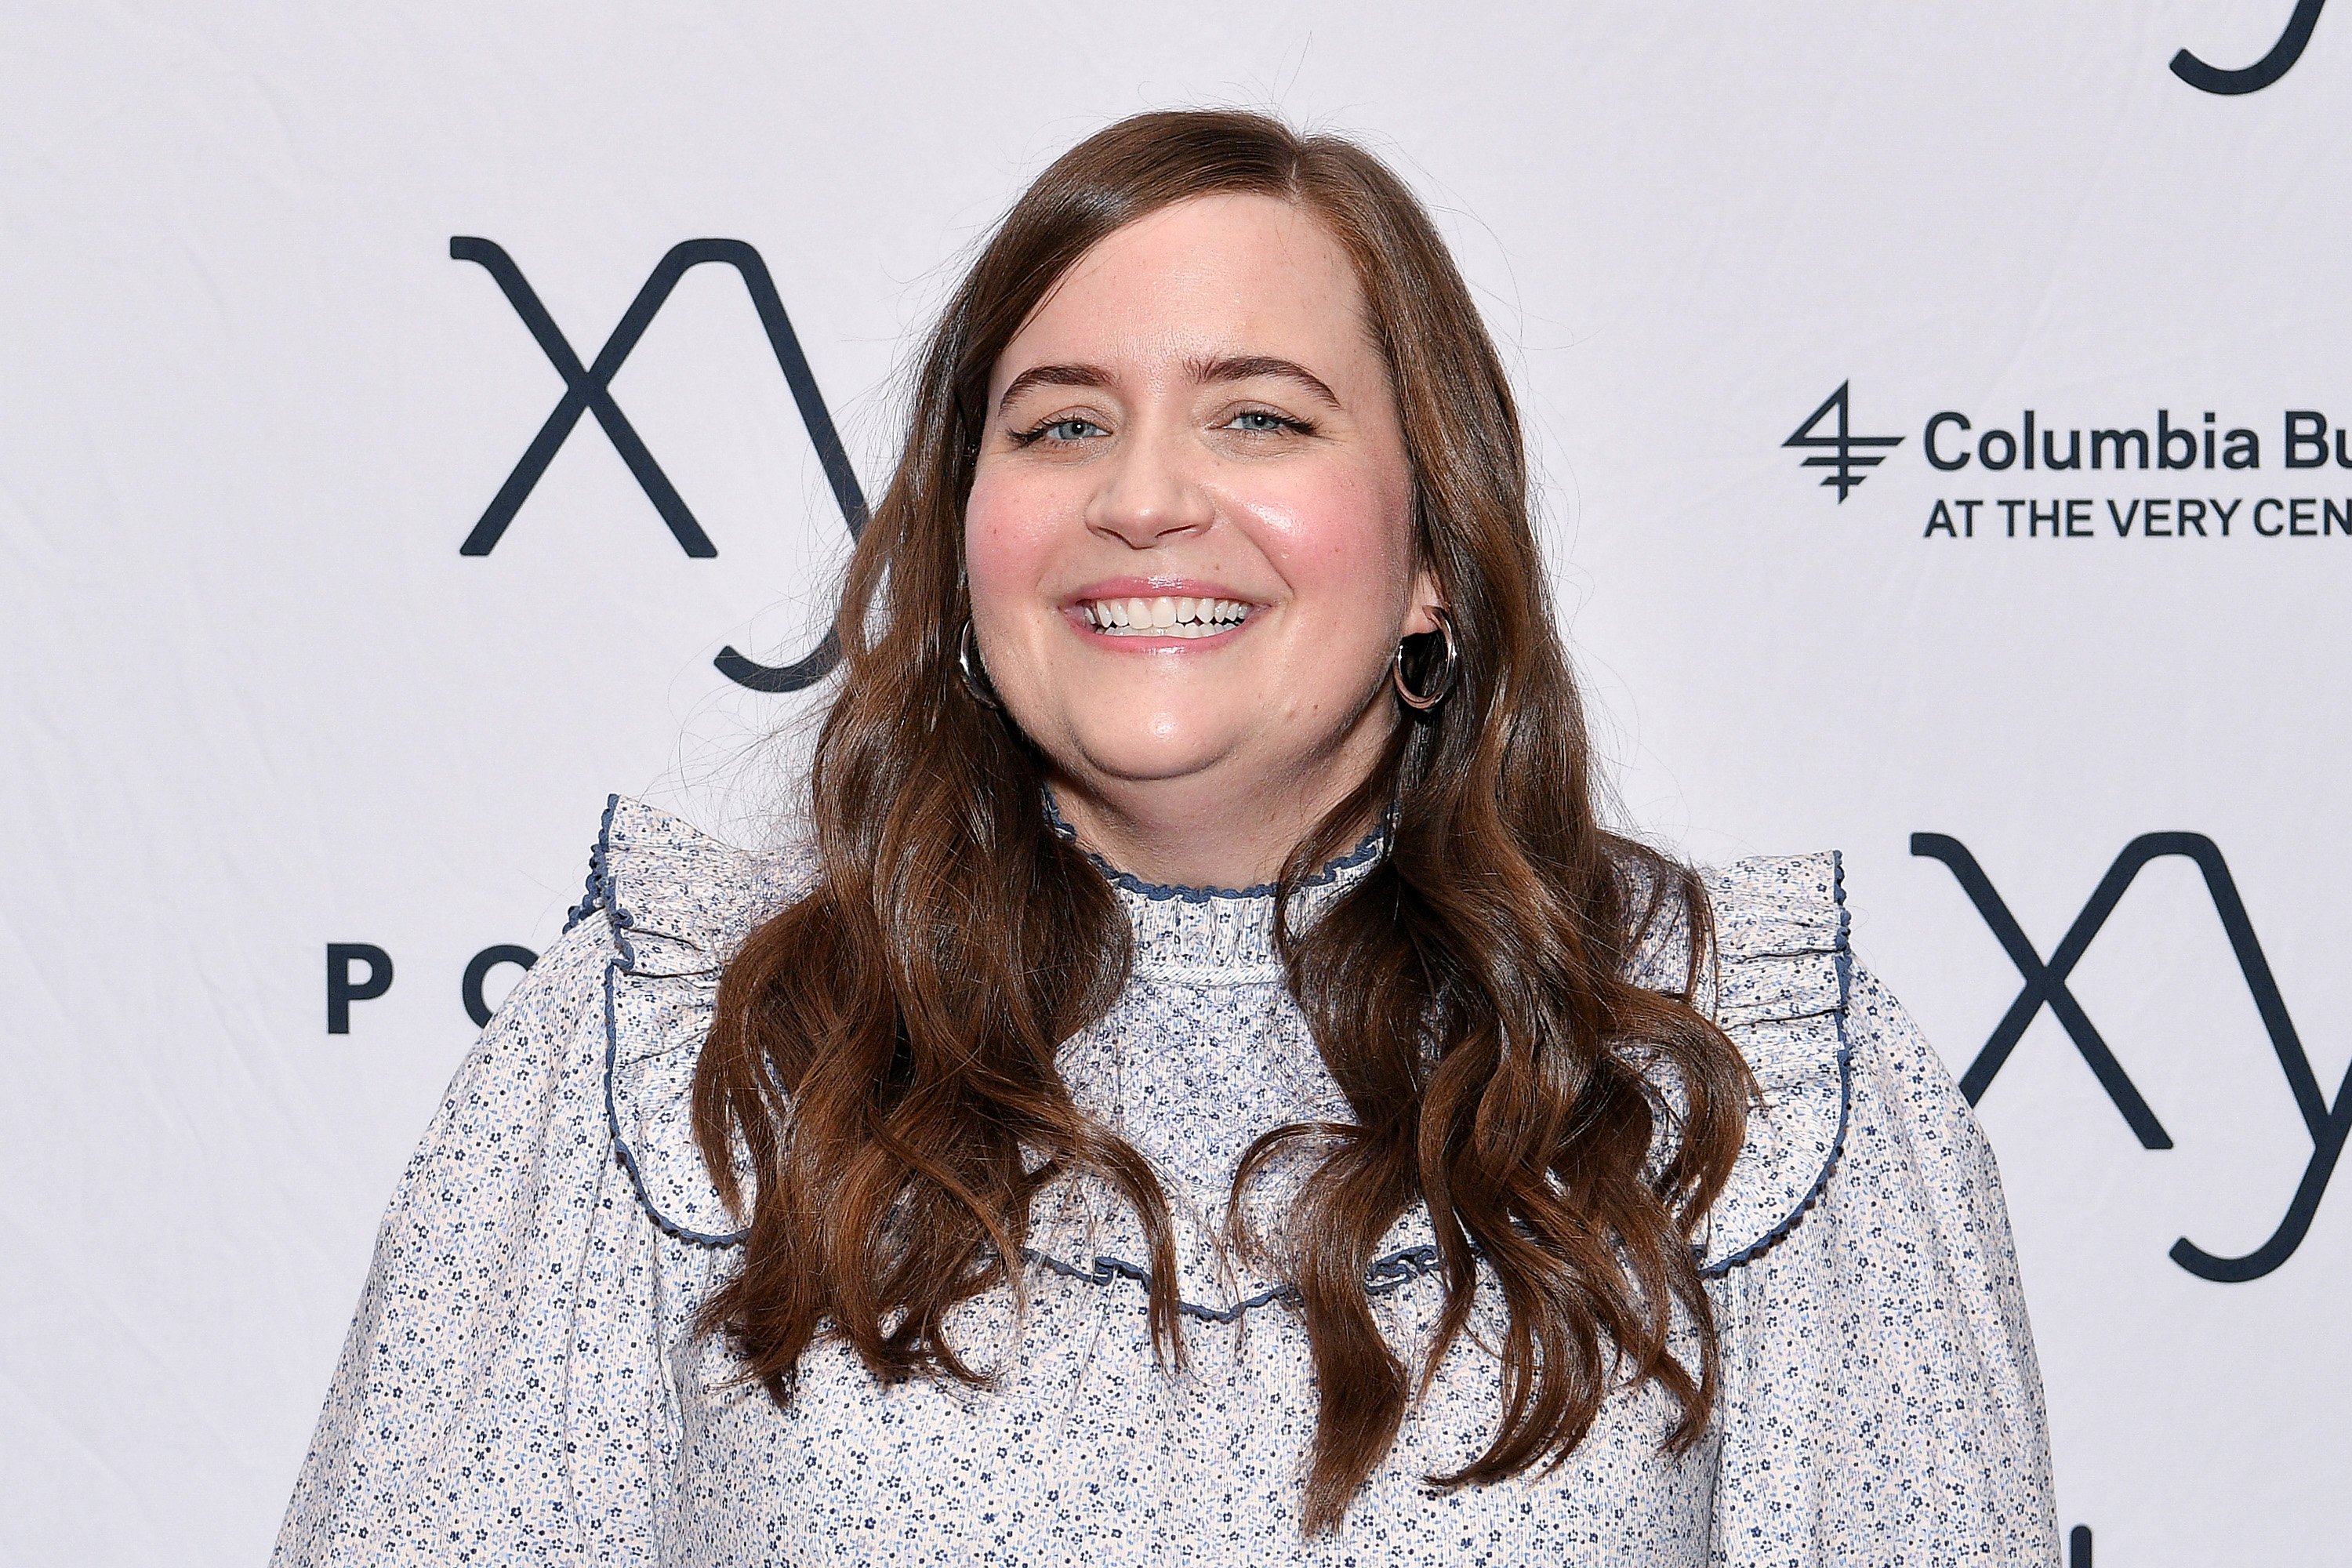 Aidy Bryant of 'Saturday Night Live' smiles for cameras as she attends Hulu's 'Shrill' Season 2 Preview & Talk at 92nd Street Y